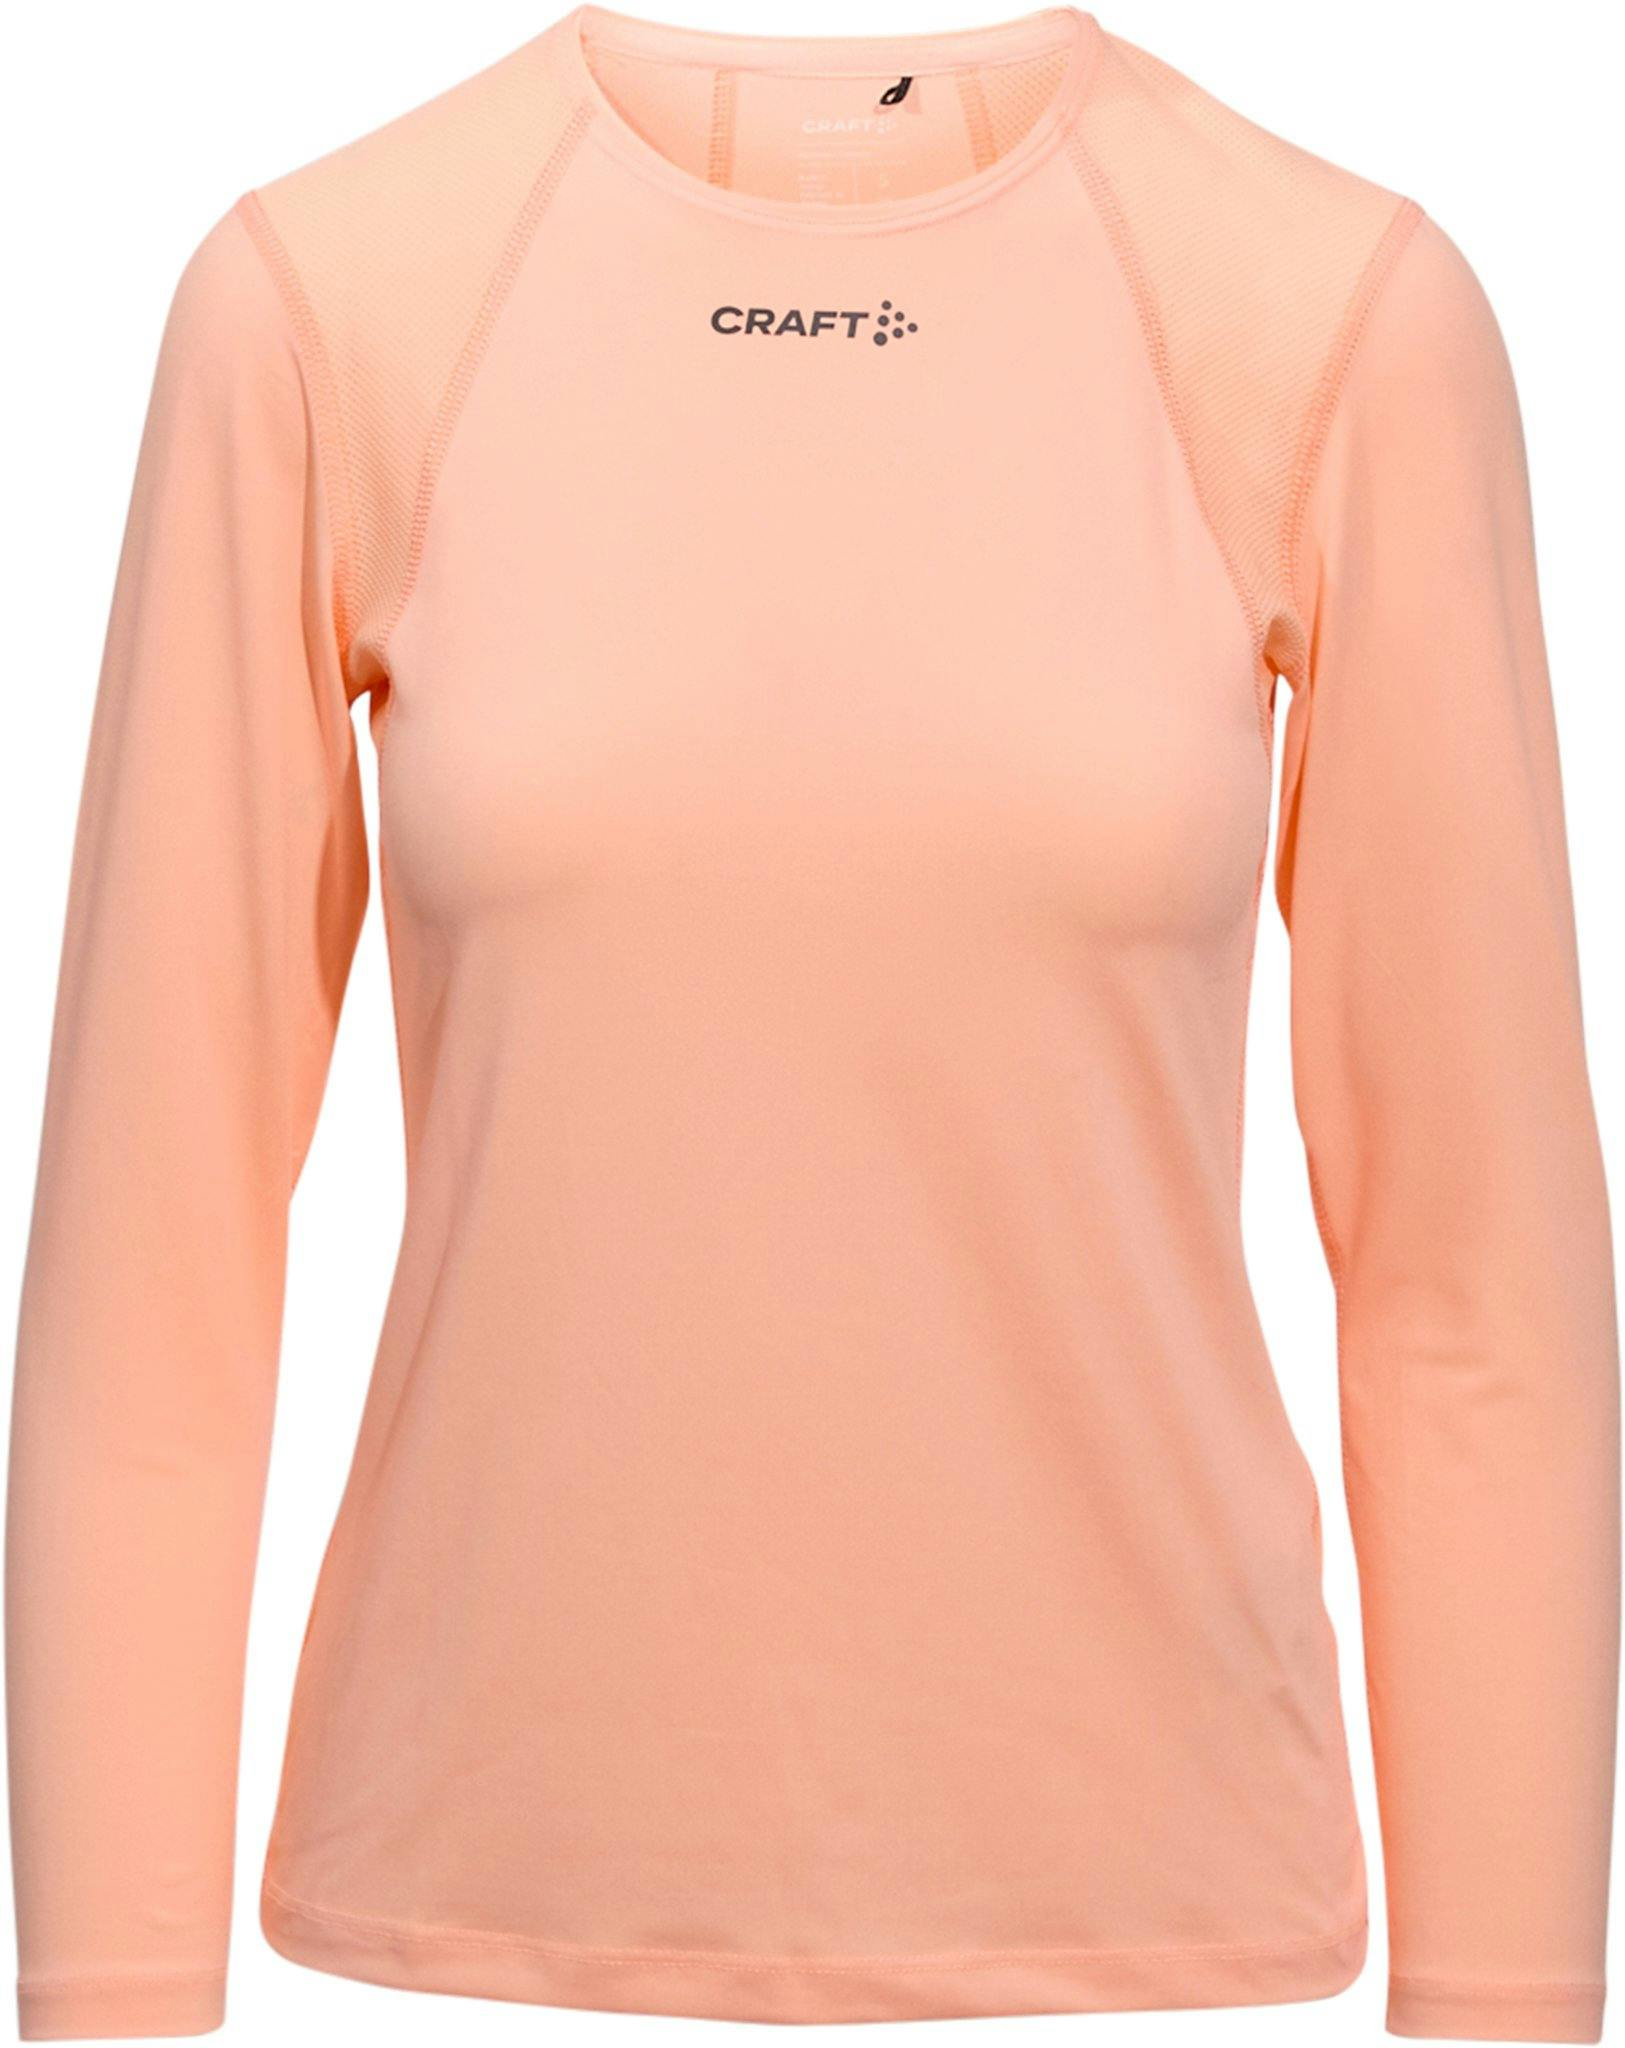 Product image for ADV Essence Long Sleeve T-Shirt - Women's